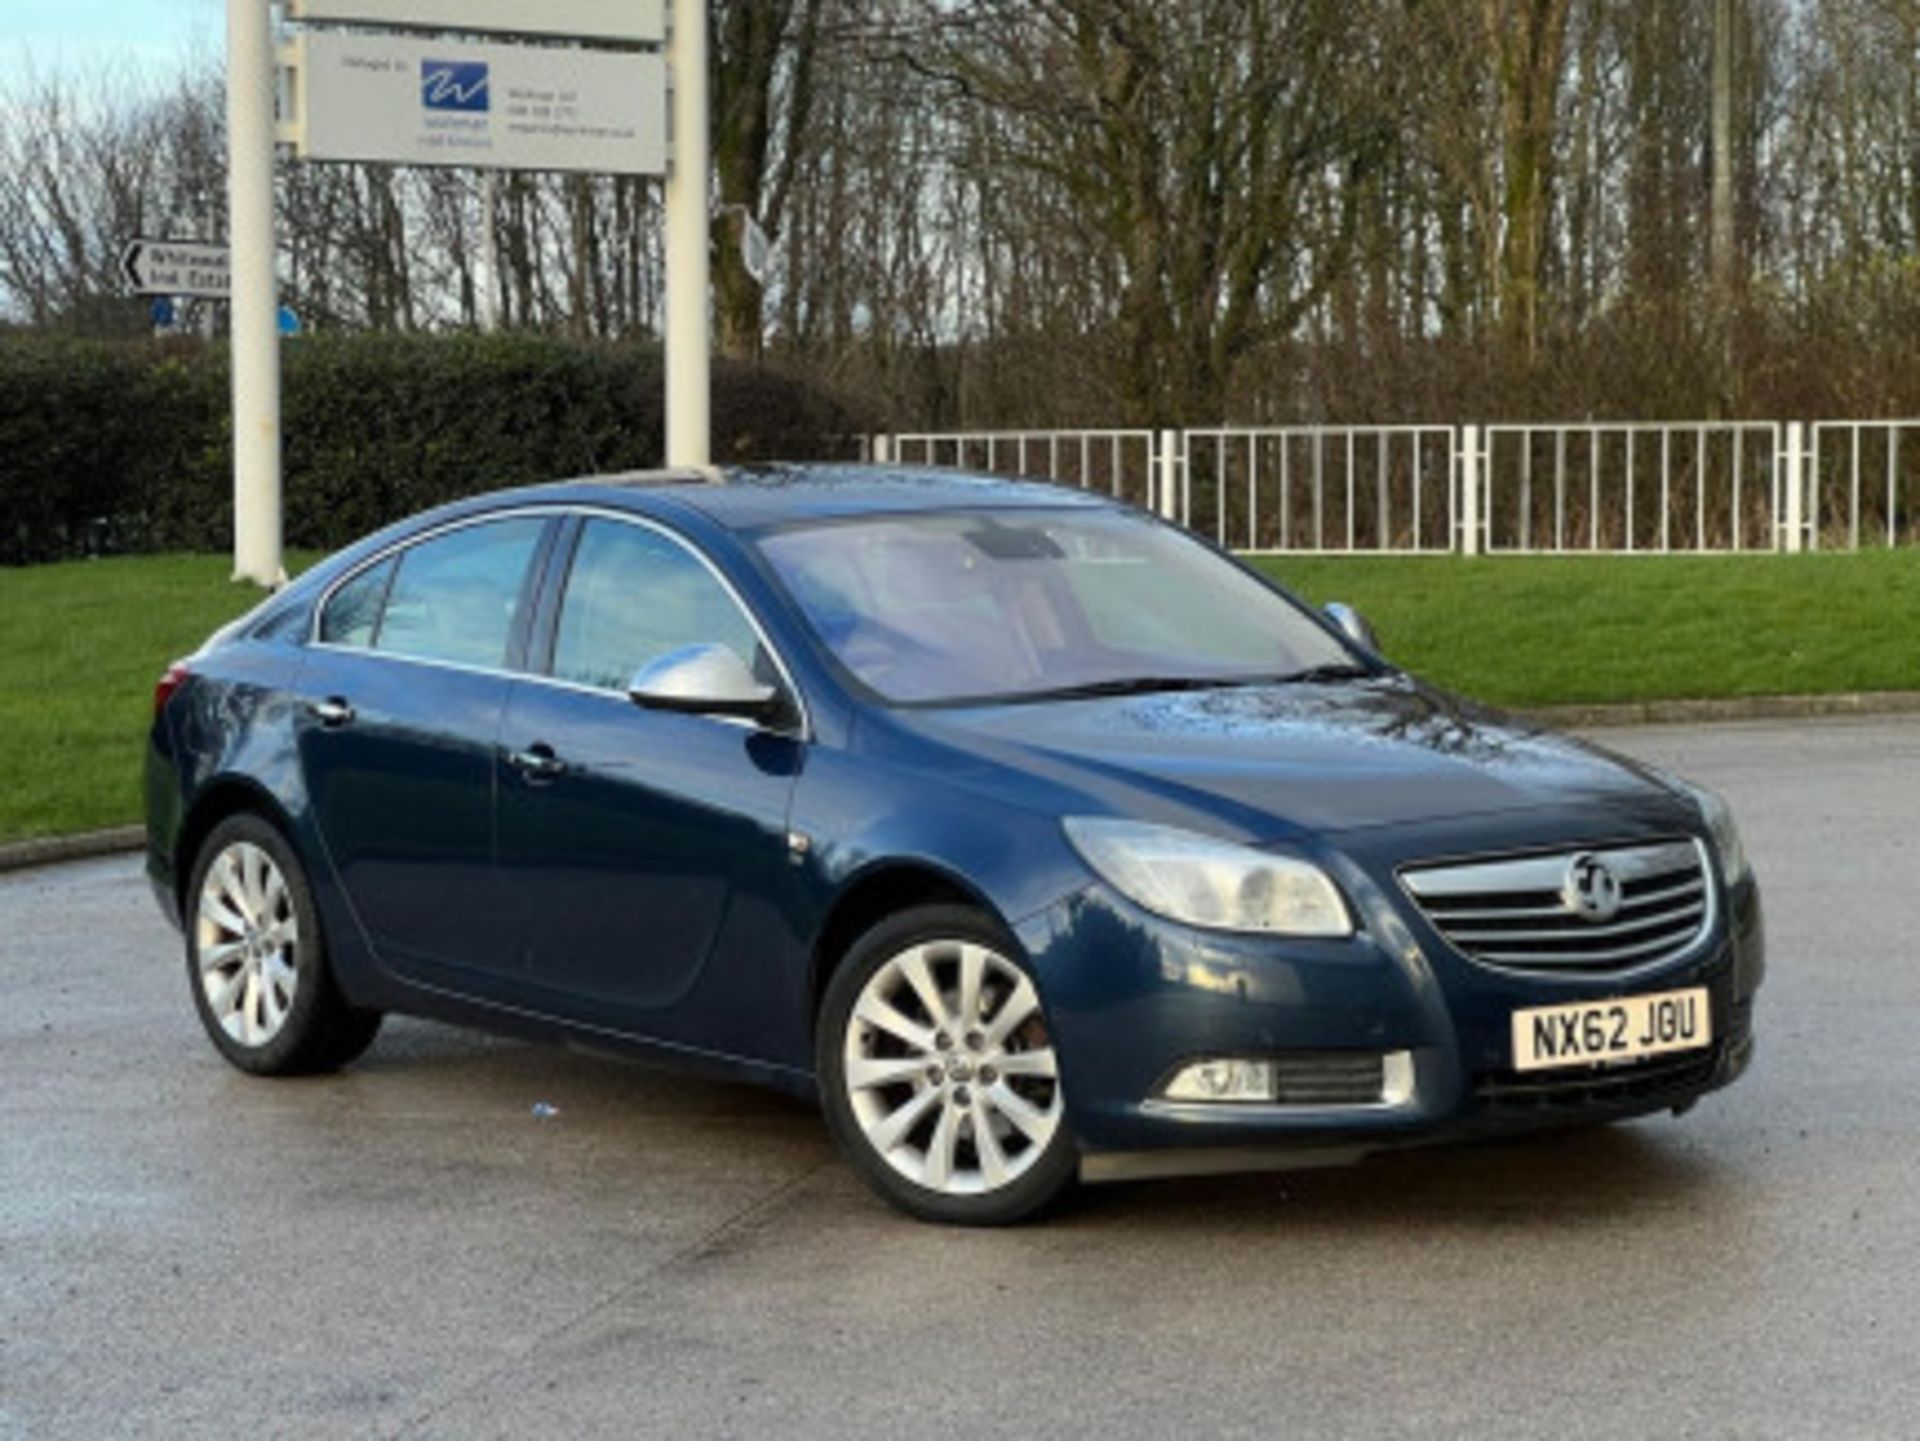 2012 VAUXHALL INSIGNIA 2.0 CDTI ELITE AUTO EURO 5 - DISCOVER EXCELLENCE >>--NO VAT ON HAMMER--<< - Image 54 of 120